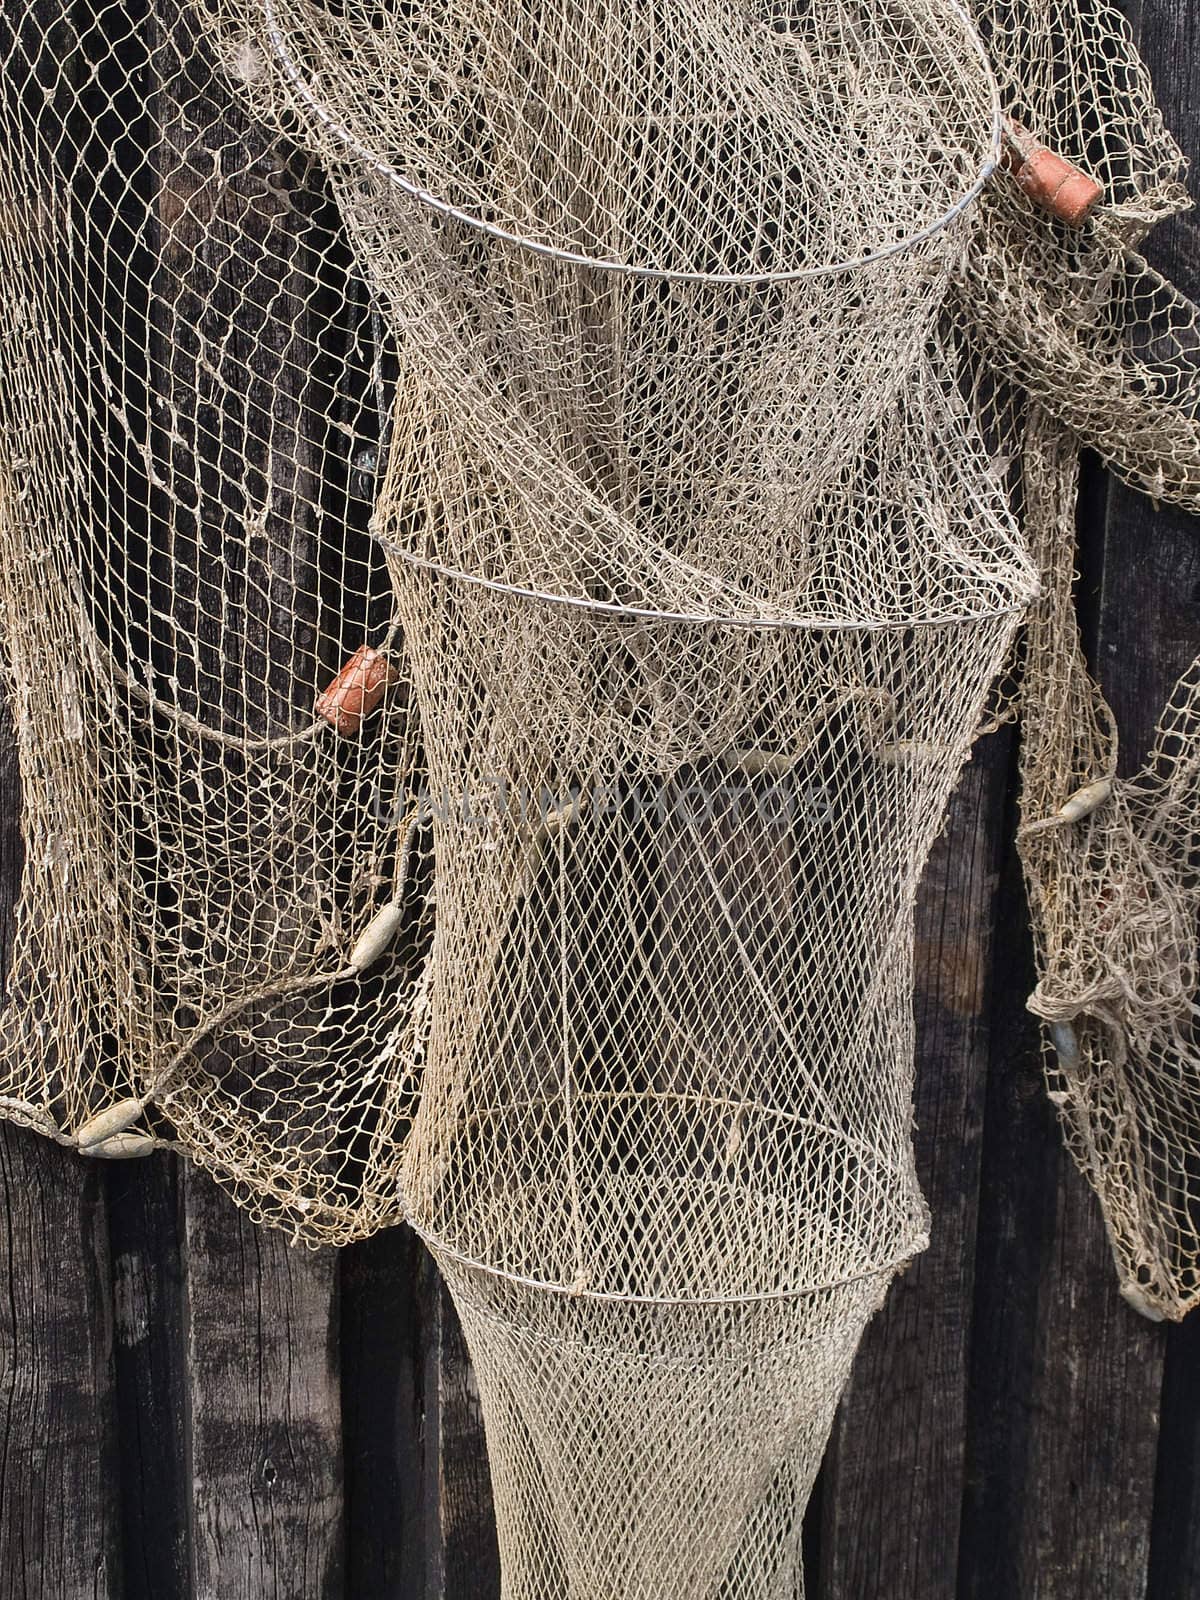 Fishing nets traps by Ronyzmbow